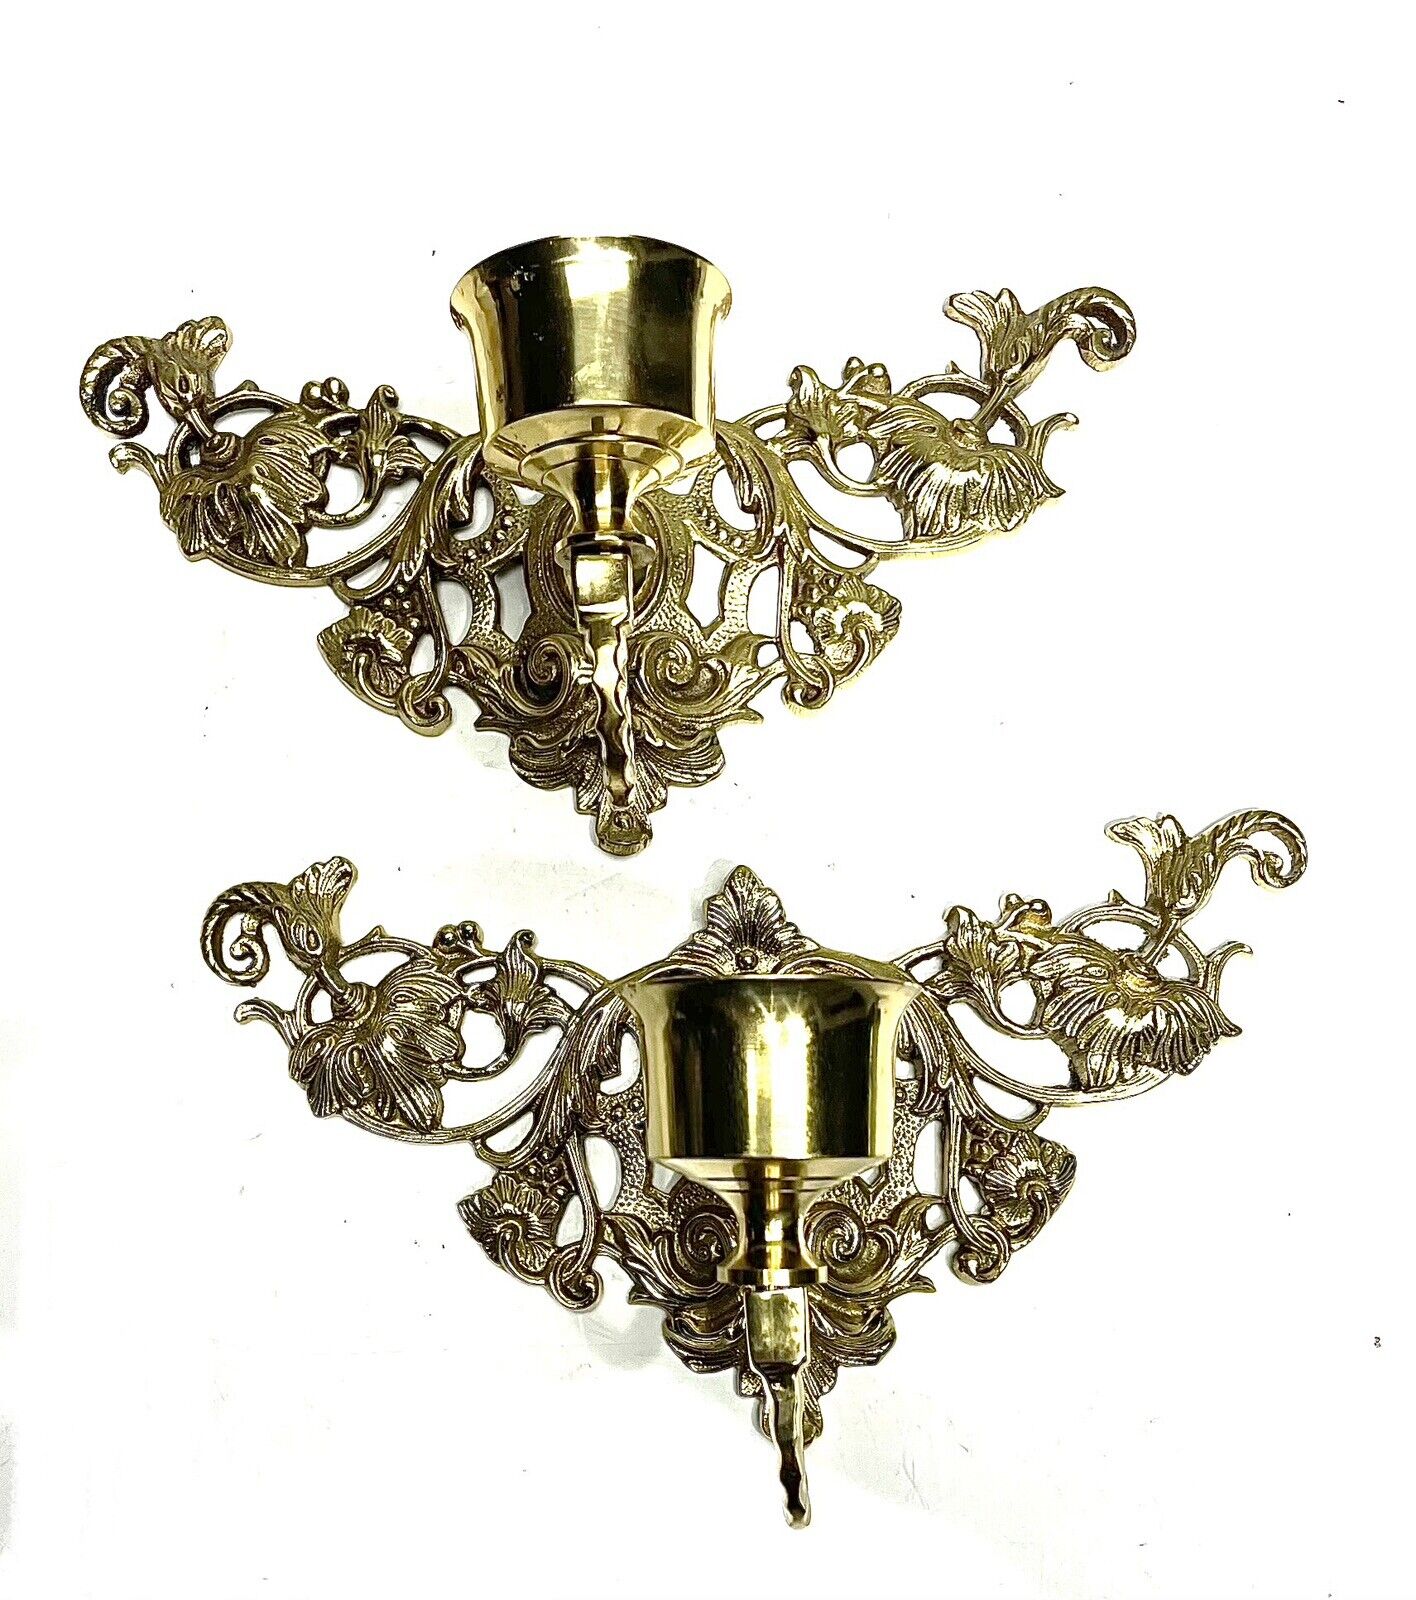 Vintage Ornate Pair of Solid Brass Wall Sconce Candlestick Holders